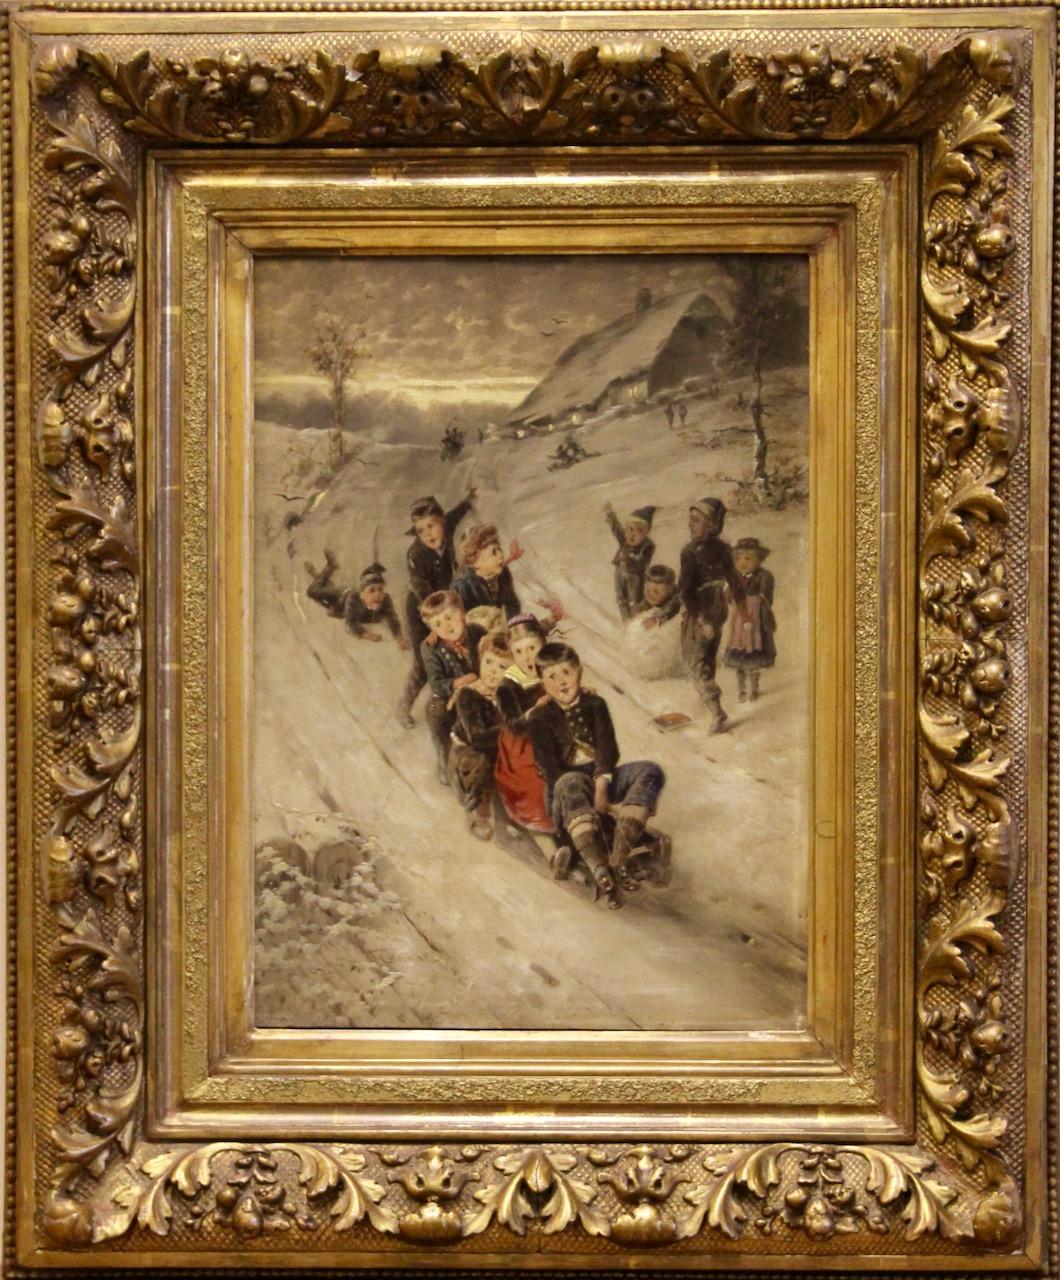 Cheerful winter landscape with children playing and sledding.

Signed lower left. Age-related condition.

Dimensions with frame: 48 cm x 58.5 cm
Dimensions without frame: 25.5 cm x 36 cm